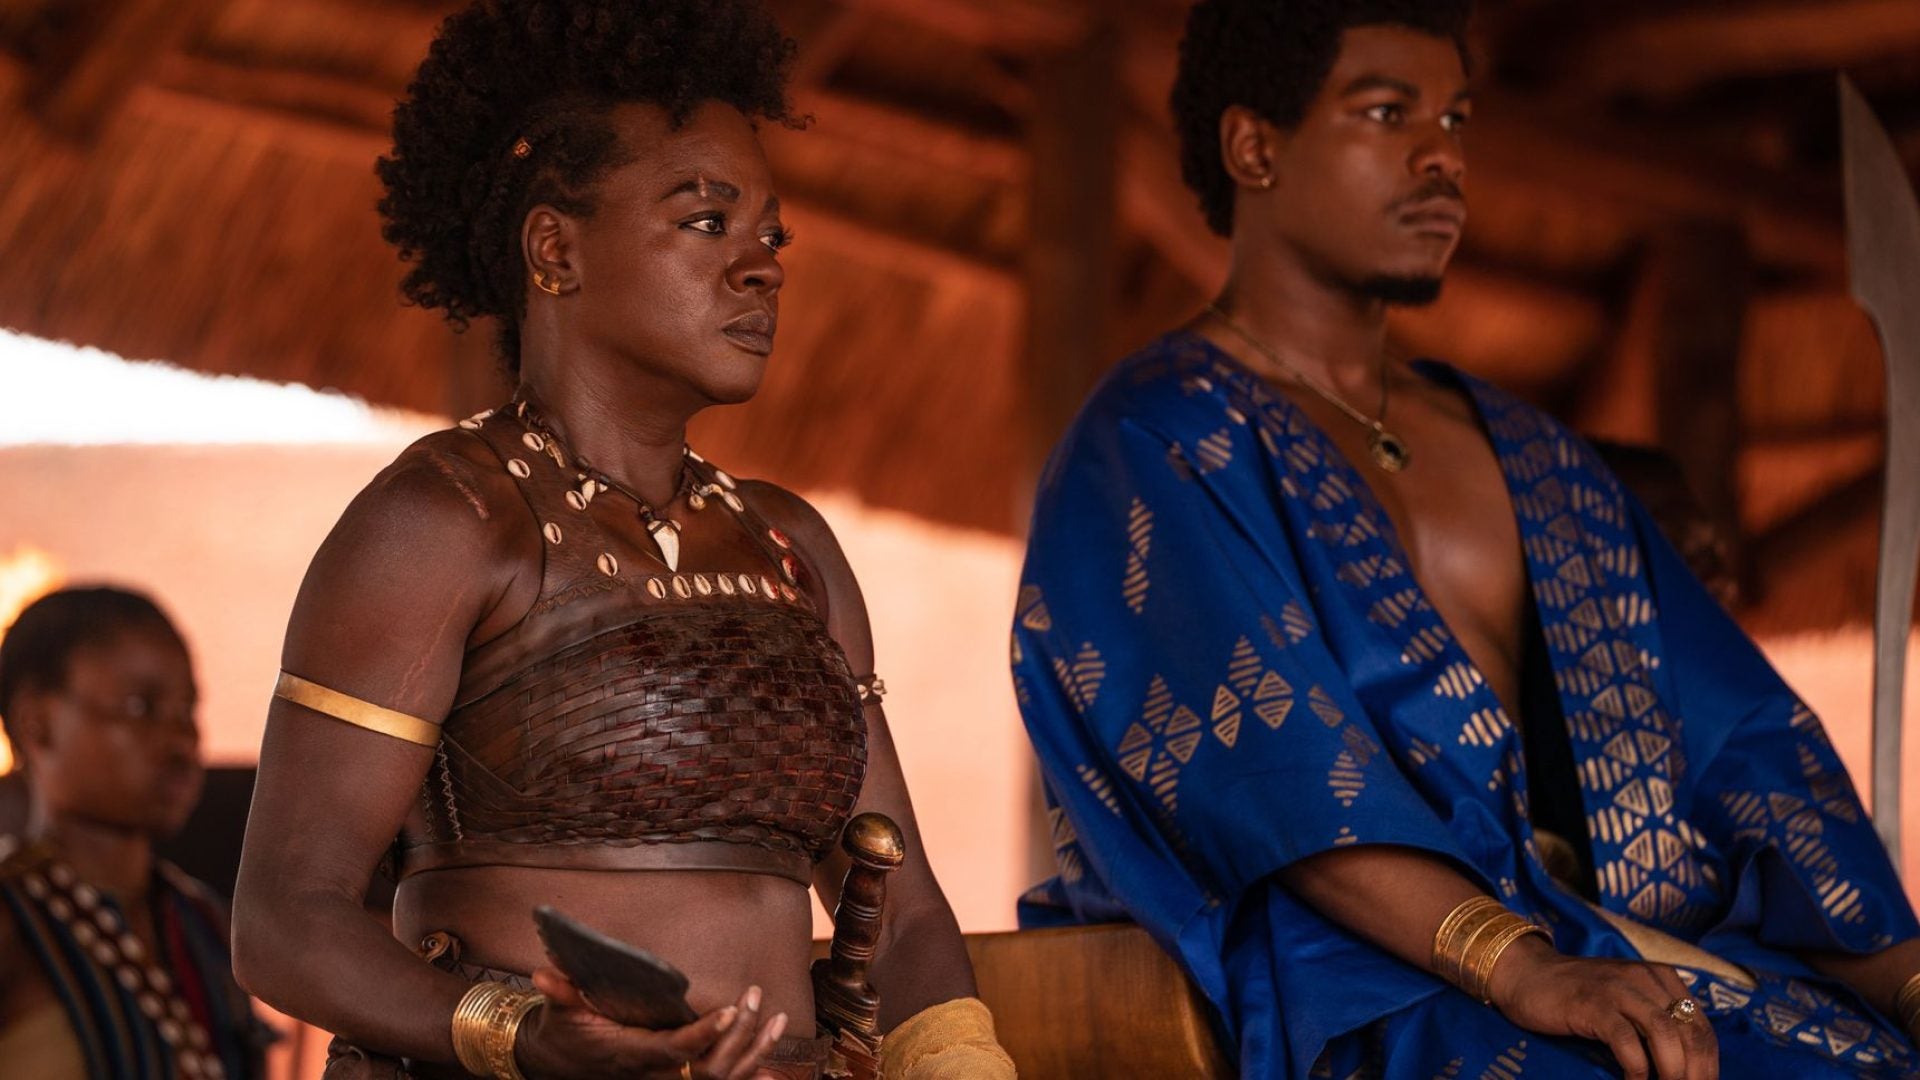 ‘The Woman King’ Owns The Box Office, Earning $19M In Its Opening Weekend